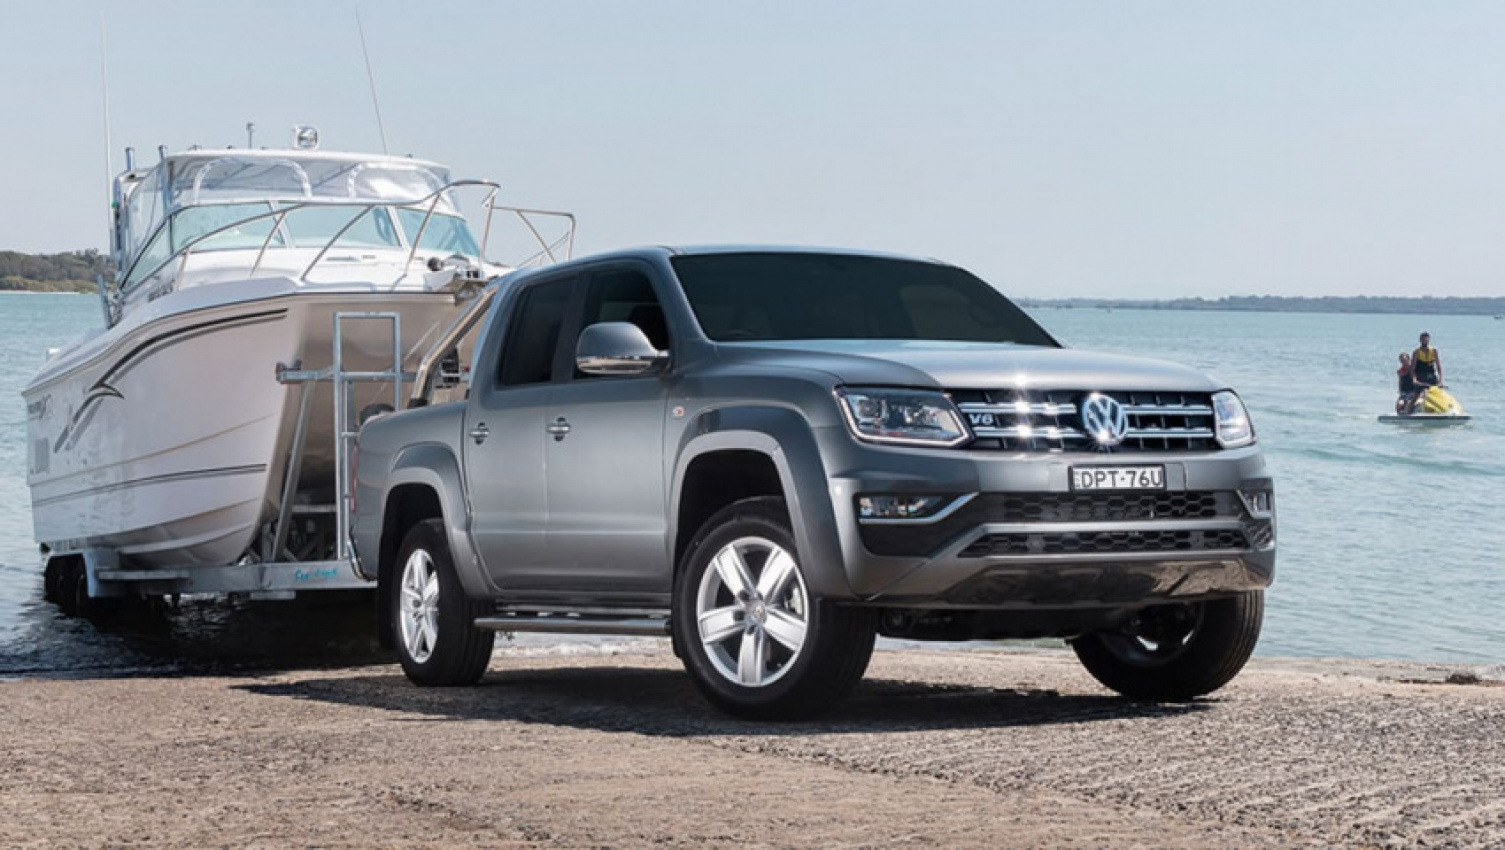 autos, cars, volkswagen, commercial, hatchback, industry news, people mover, showroom news, volkswagen amarok, volkswagen amarok 2022, volkswagen arteon, volkswagen arteon 2022, volkswagen caddy, volkswagen caddy 2022, volkswagen caravelle, volkswagen caravelle 2022, volkswagen commercial range, volkswagen crafter, volkswagen crafter 2022, volkswagen golf, volkswagen golf 2022, volkswagen hatchback range, volkswagen multivan, volkswagen multivan 2022, volkswagen news, volkswagen people mover range, volkswagen sedan range, volkswagen suv range, volkswagen t-cross, volkswagen t-cross 2022, volkswagen tiguan, volkswagen touareg, volkswagen touareg 2022, volkswagen transporter, volkswagen transporter 2022, volkswagen ute range, volkswagen australia serves up cut-price servicing deals on 2022 amarok, caddy, transporter, golf, t-cross and more